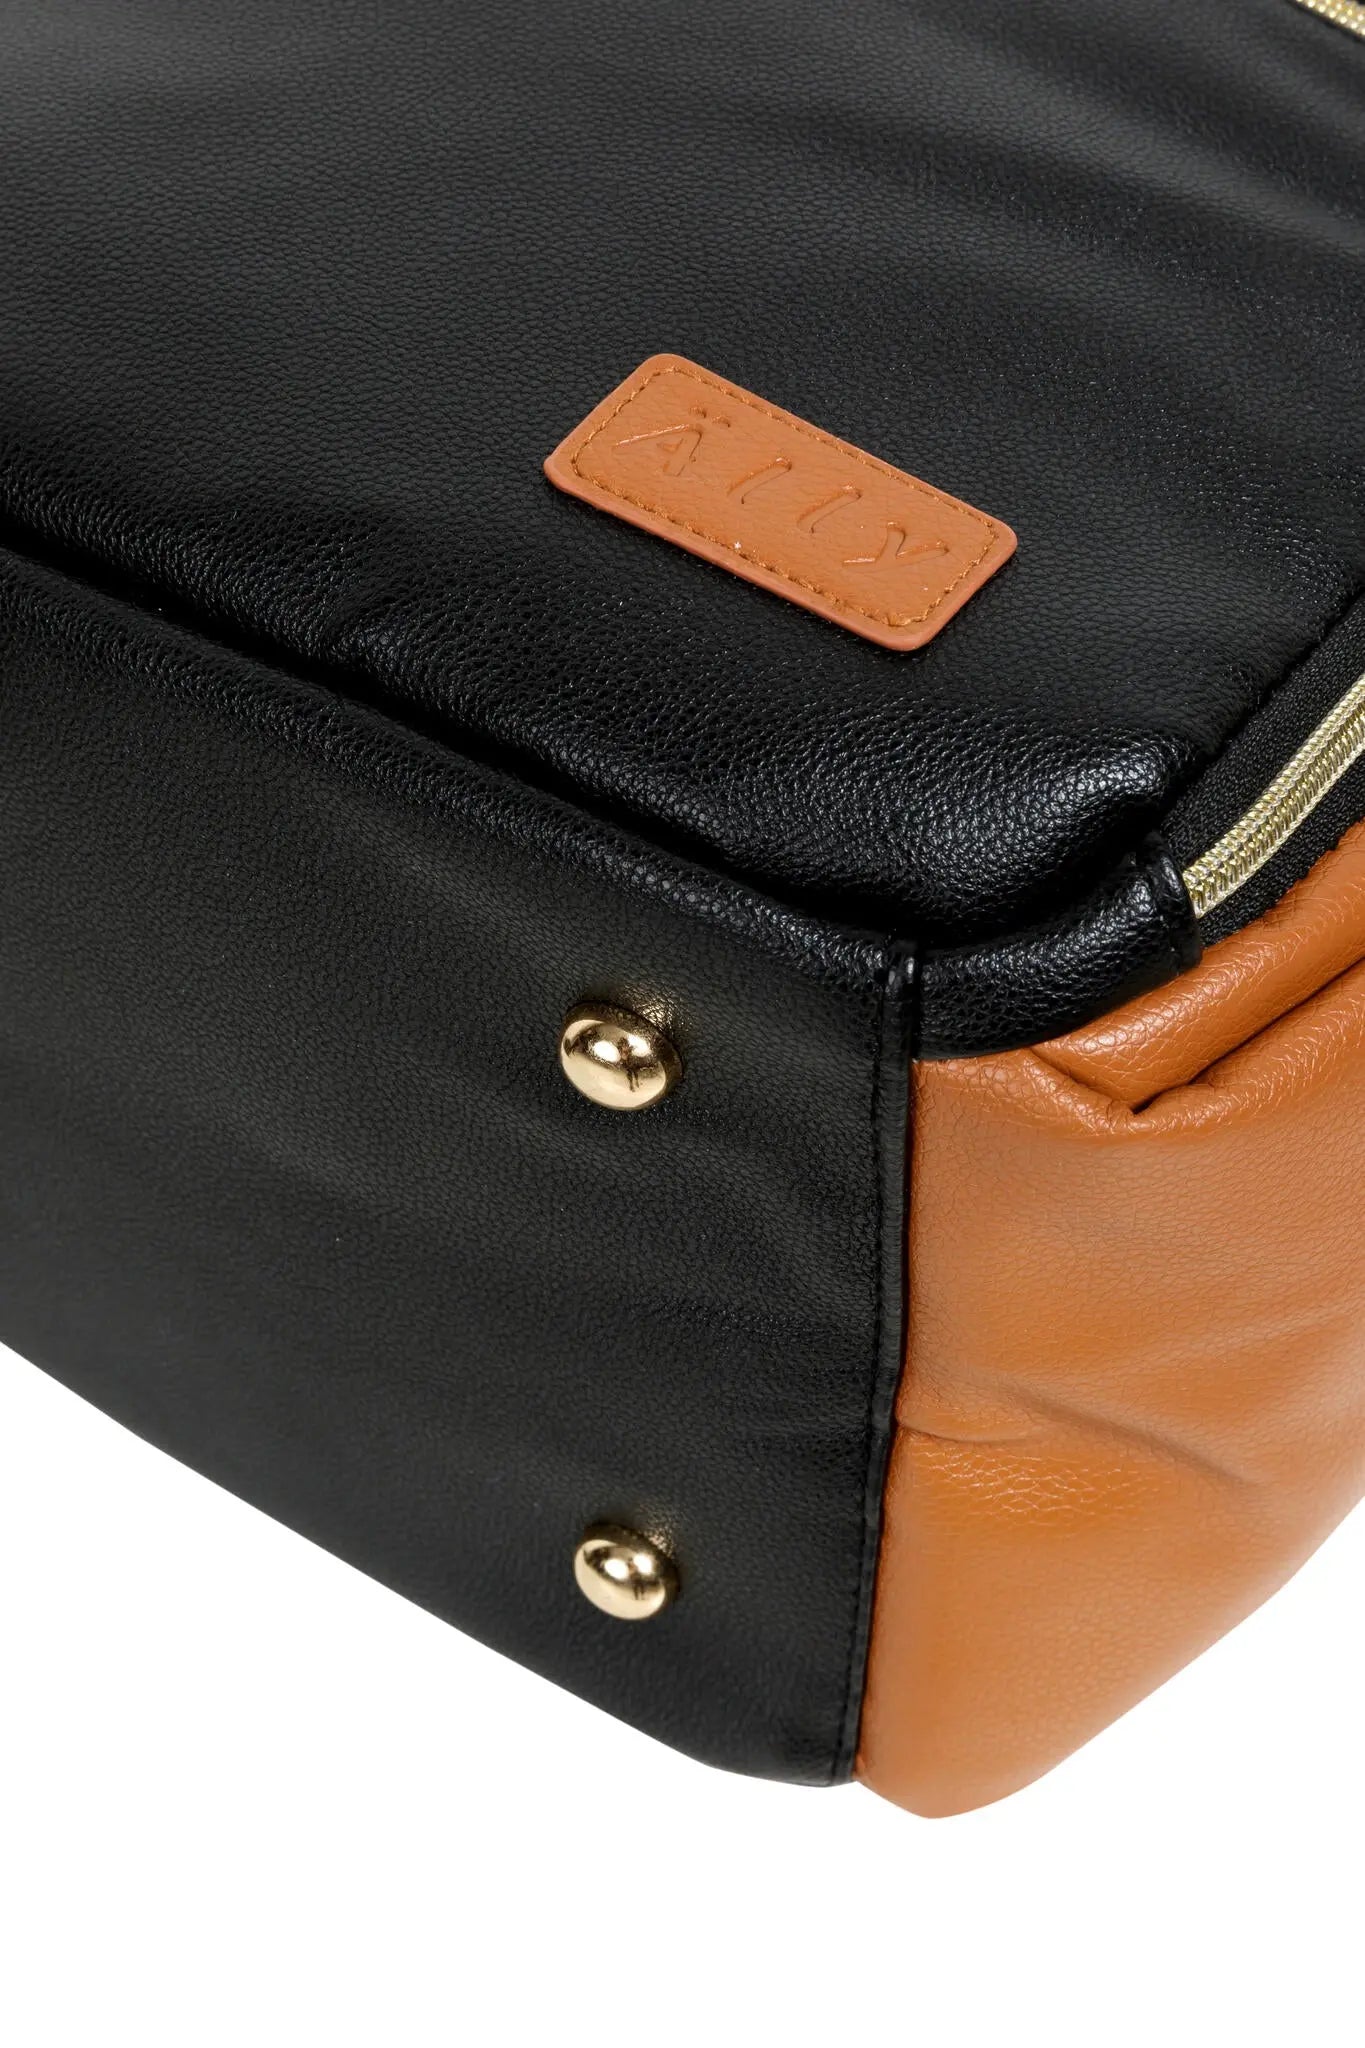 A close-up of a black coffee diaper bag with leather tag and zipper, featuring multiple pockets, stroller straps, and thermal lining for baby essentials.